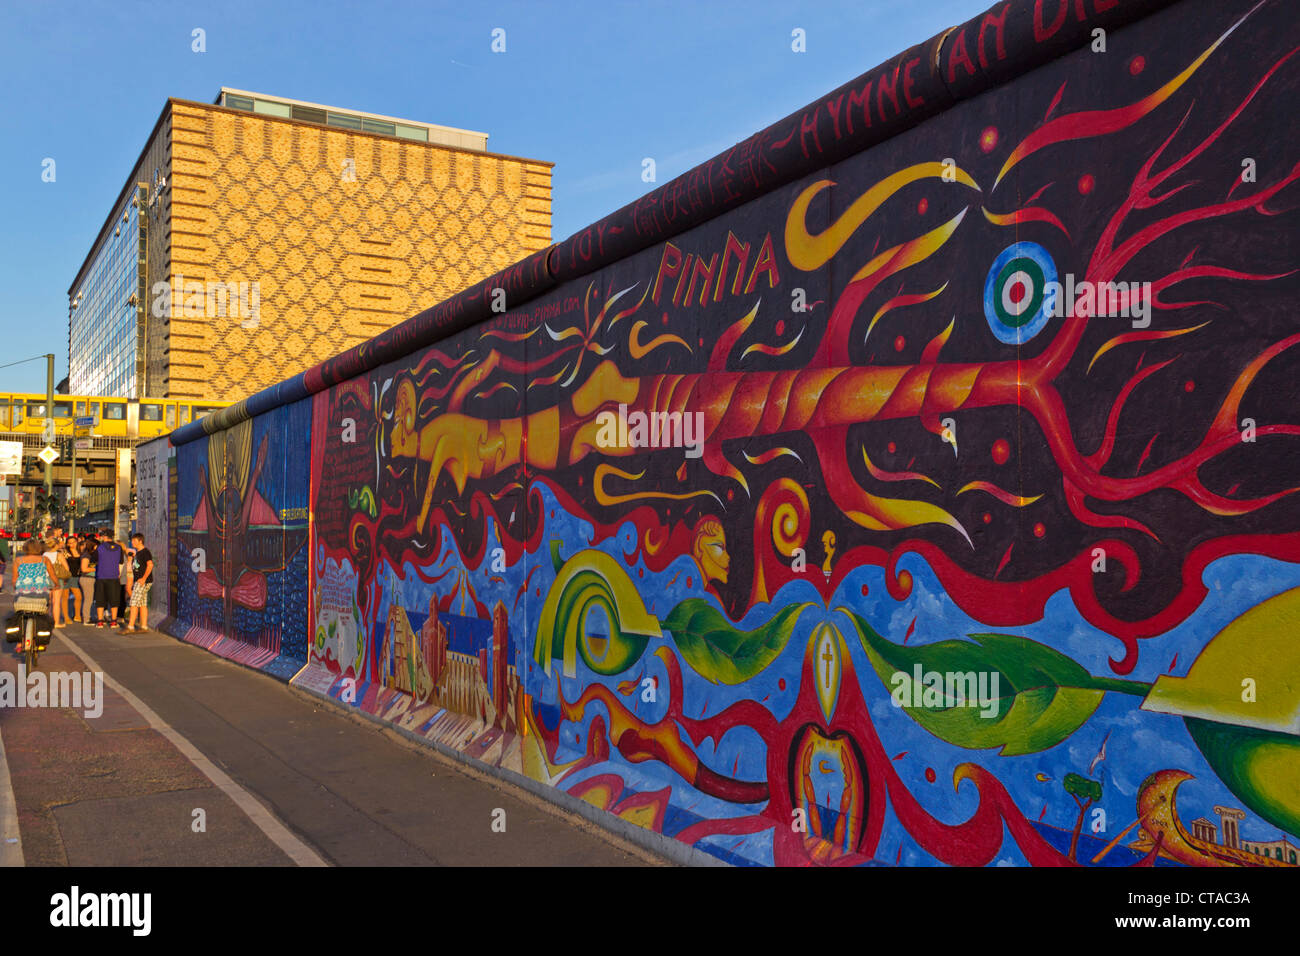 mural and Alamy photography - stock wall images Berlin hi-res